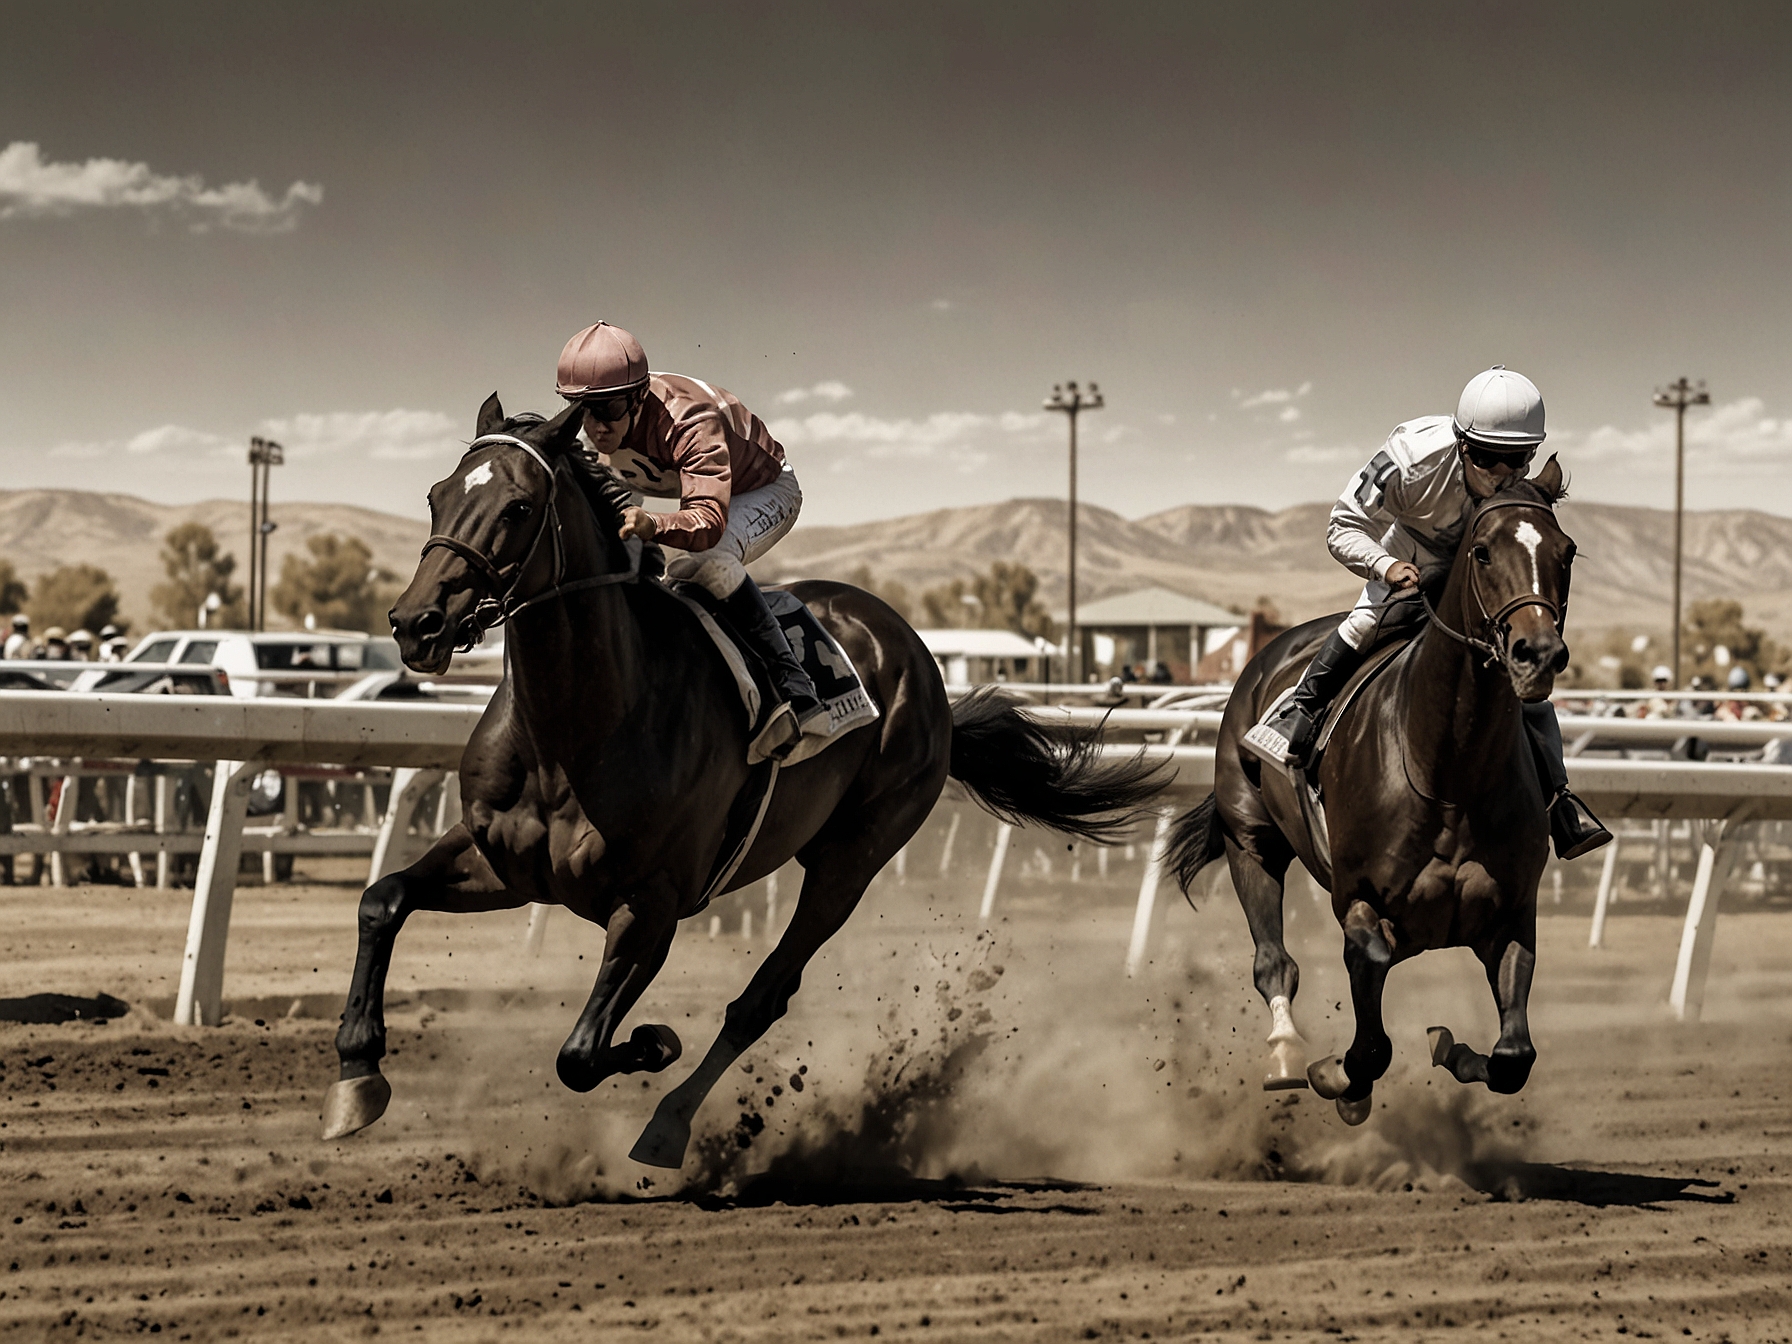 Jockeys on powerful horses race neck and neck down the track in Elko, showcasing the thrill and competitive nature of the county fair horse races.